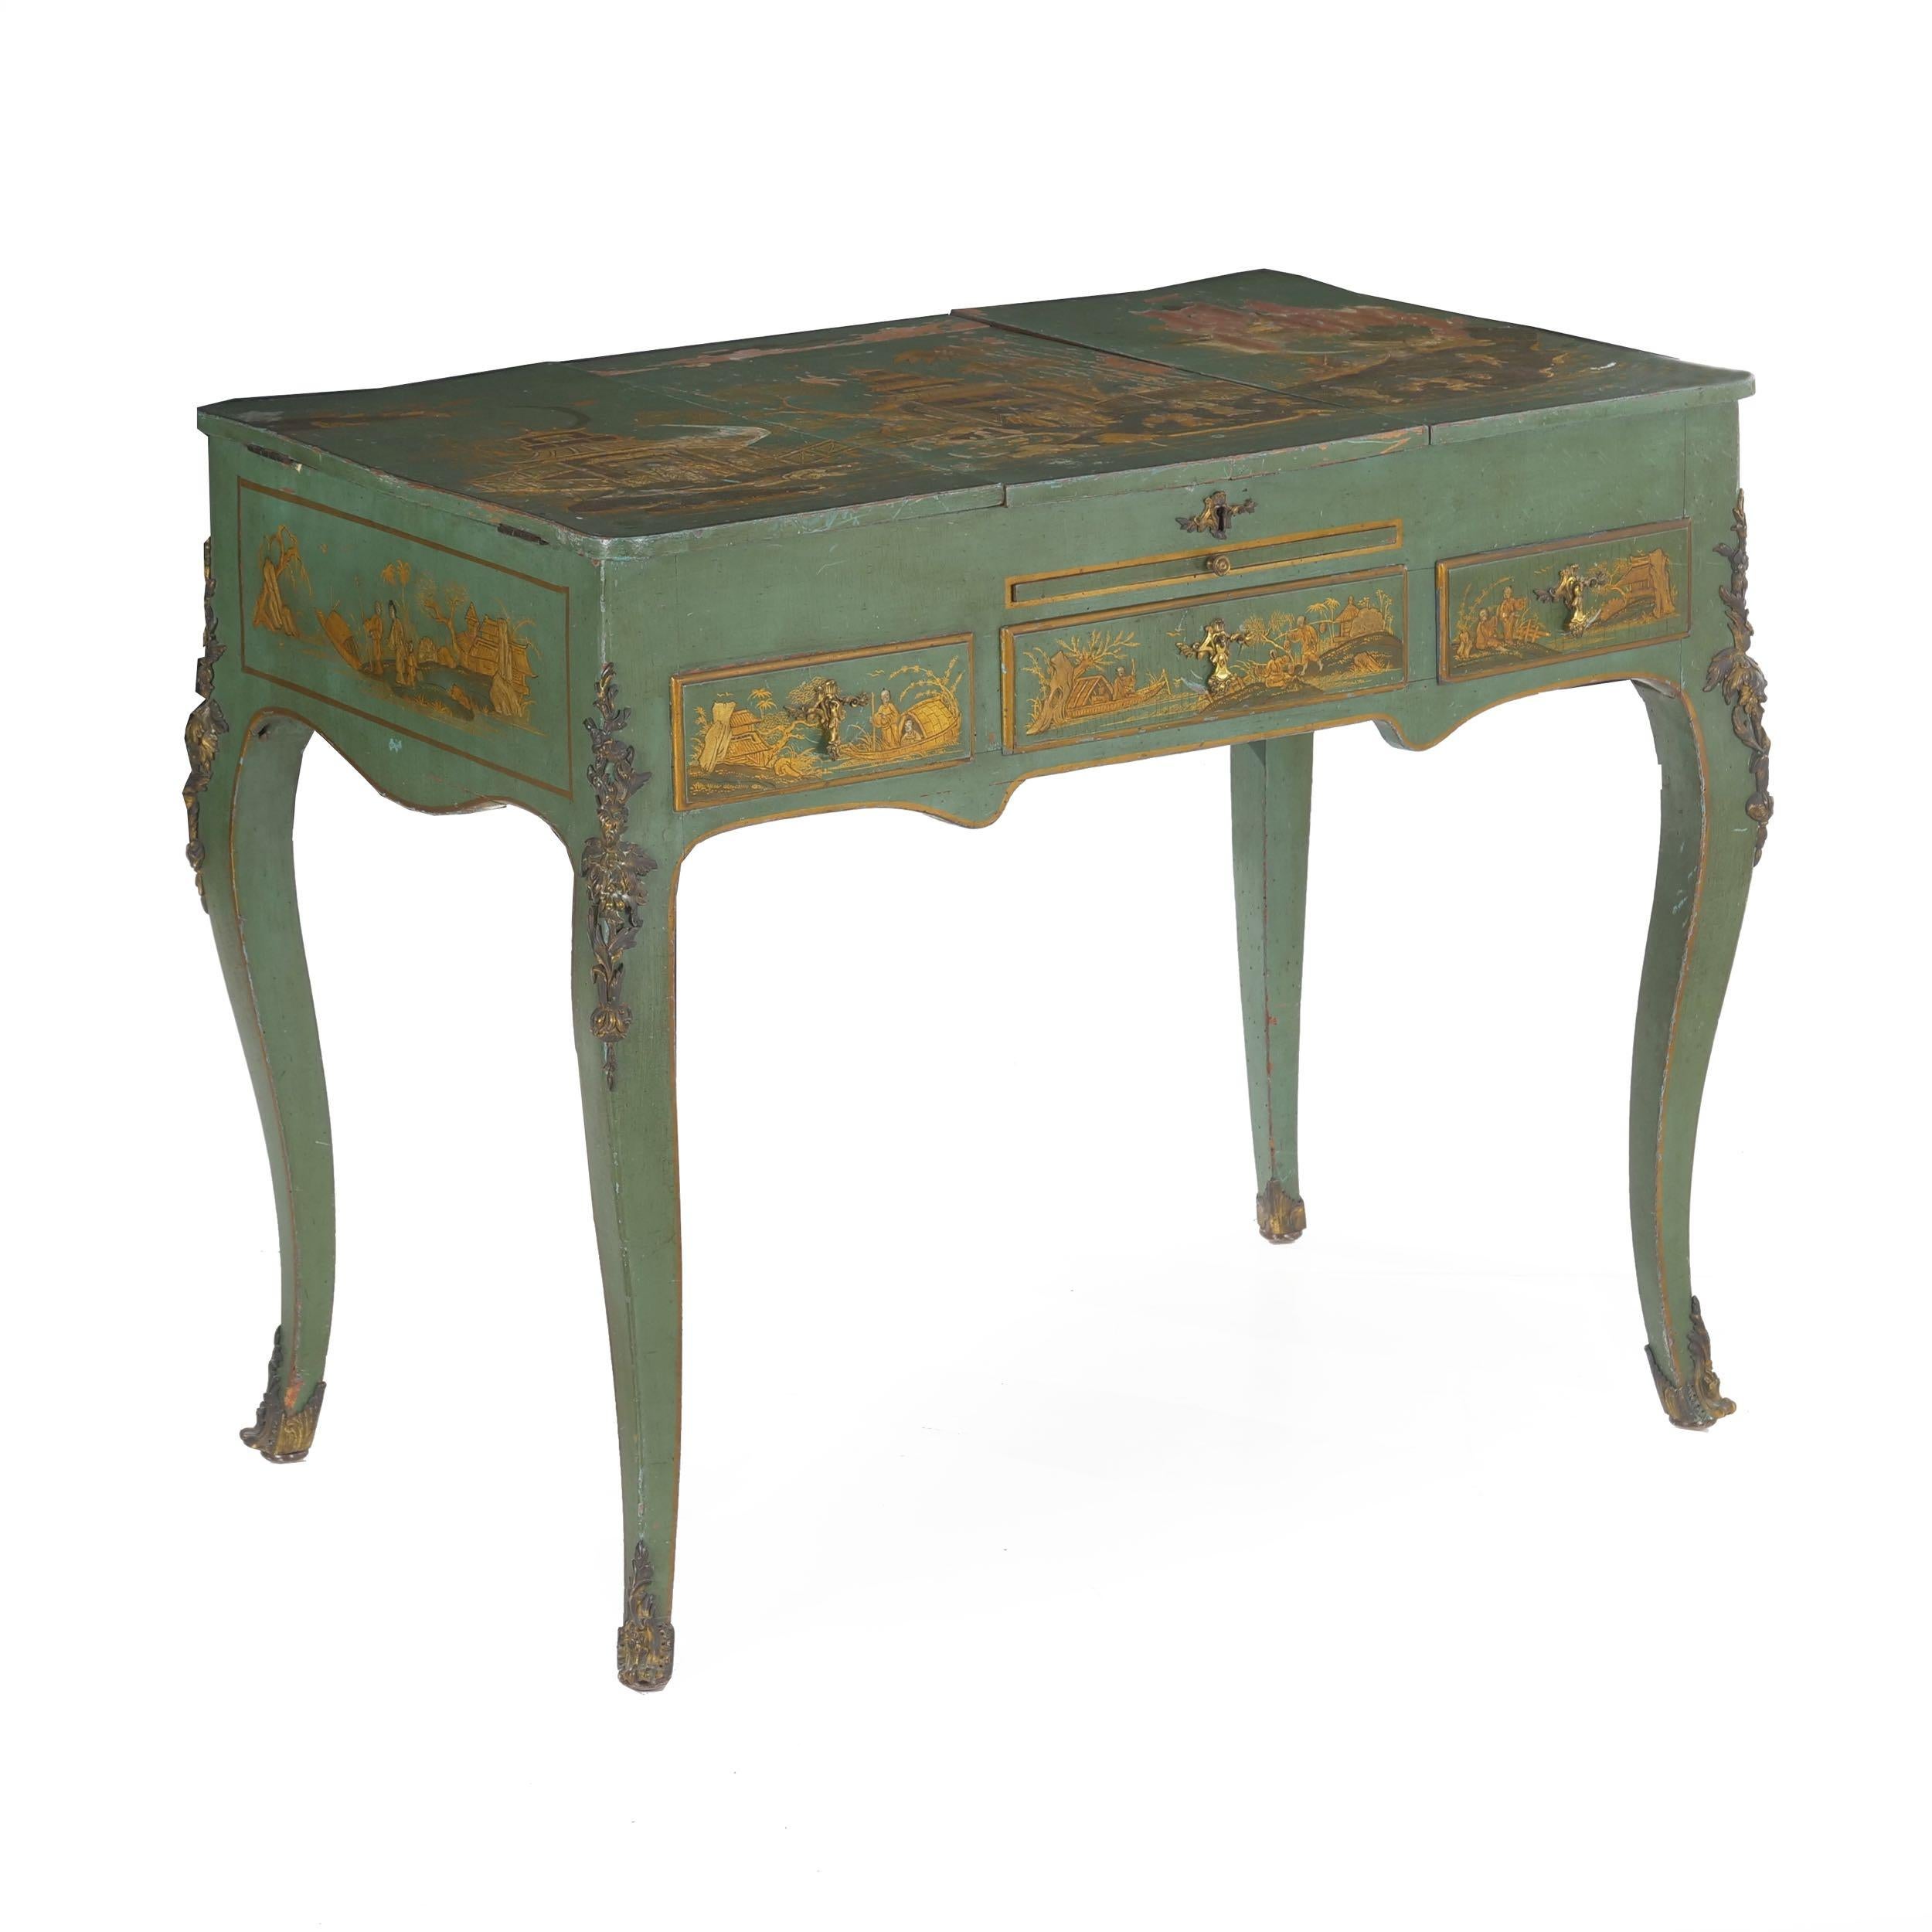 A very attractive dressing table in the Louis XV taste from the turn of the century, the table is decorated in a chinoiserie relief over a green overall ground. It features a variety of Eastern scenes, the apron centered around the role of a single